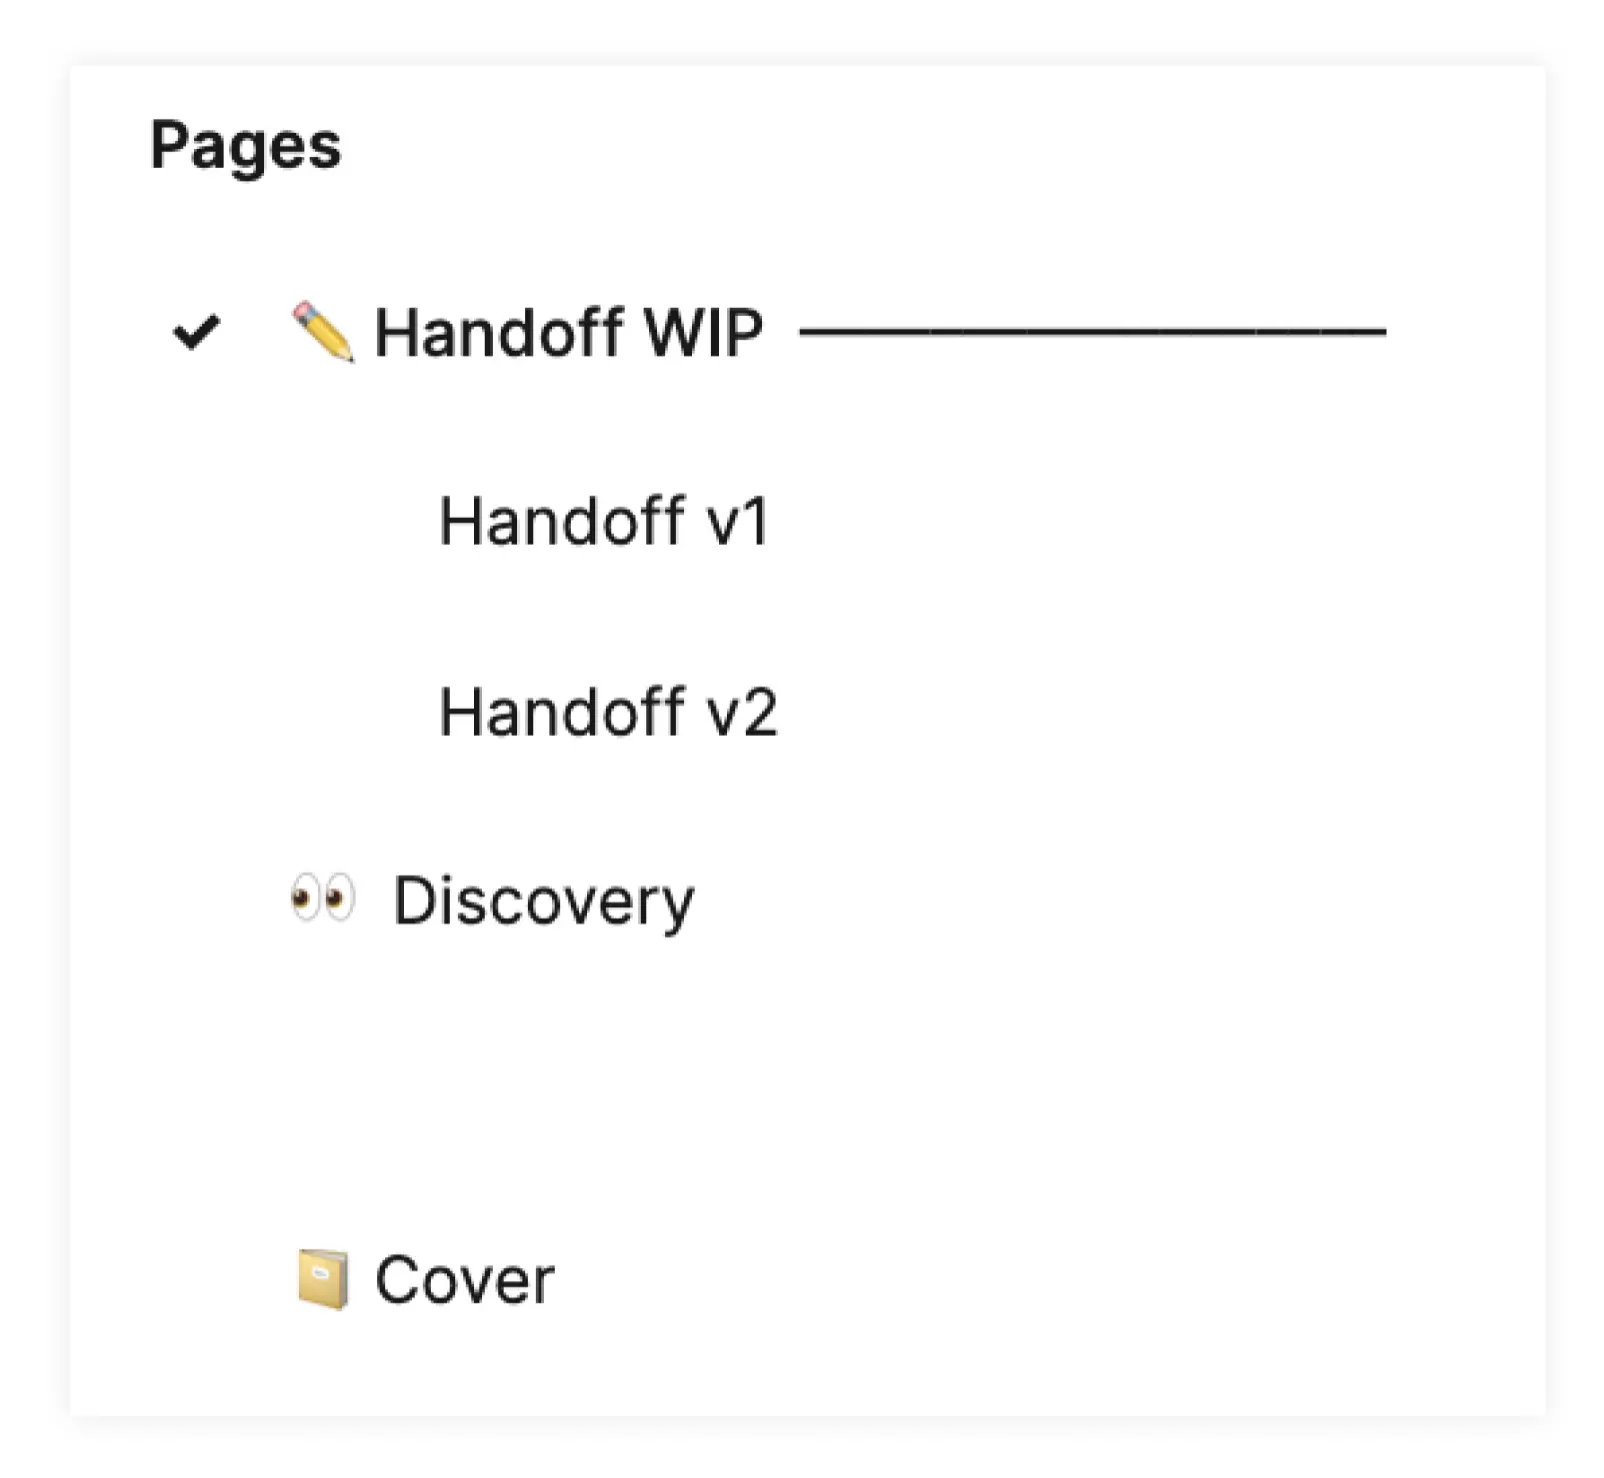 An example of how we name our handoff pages. It shows our Figma file with the handoff titles.